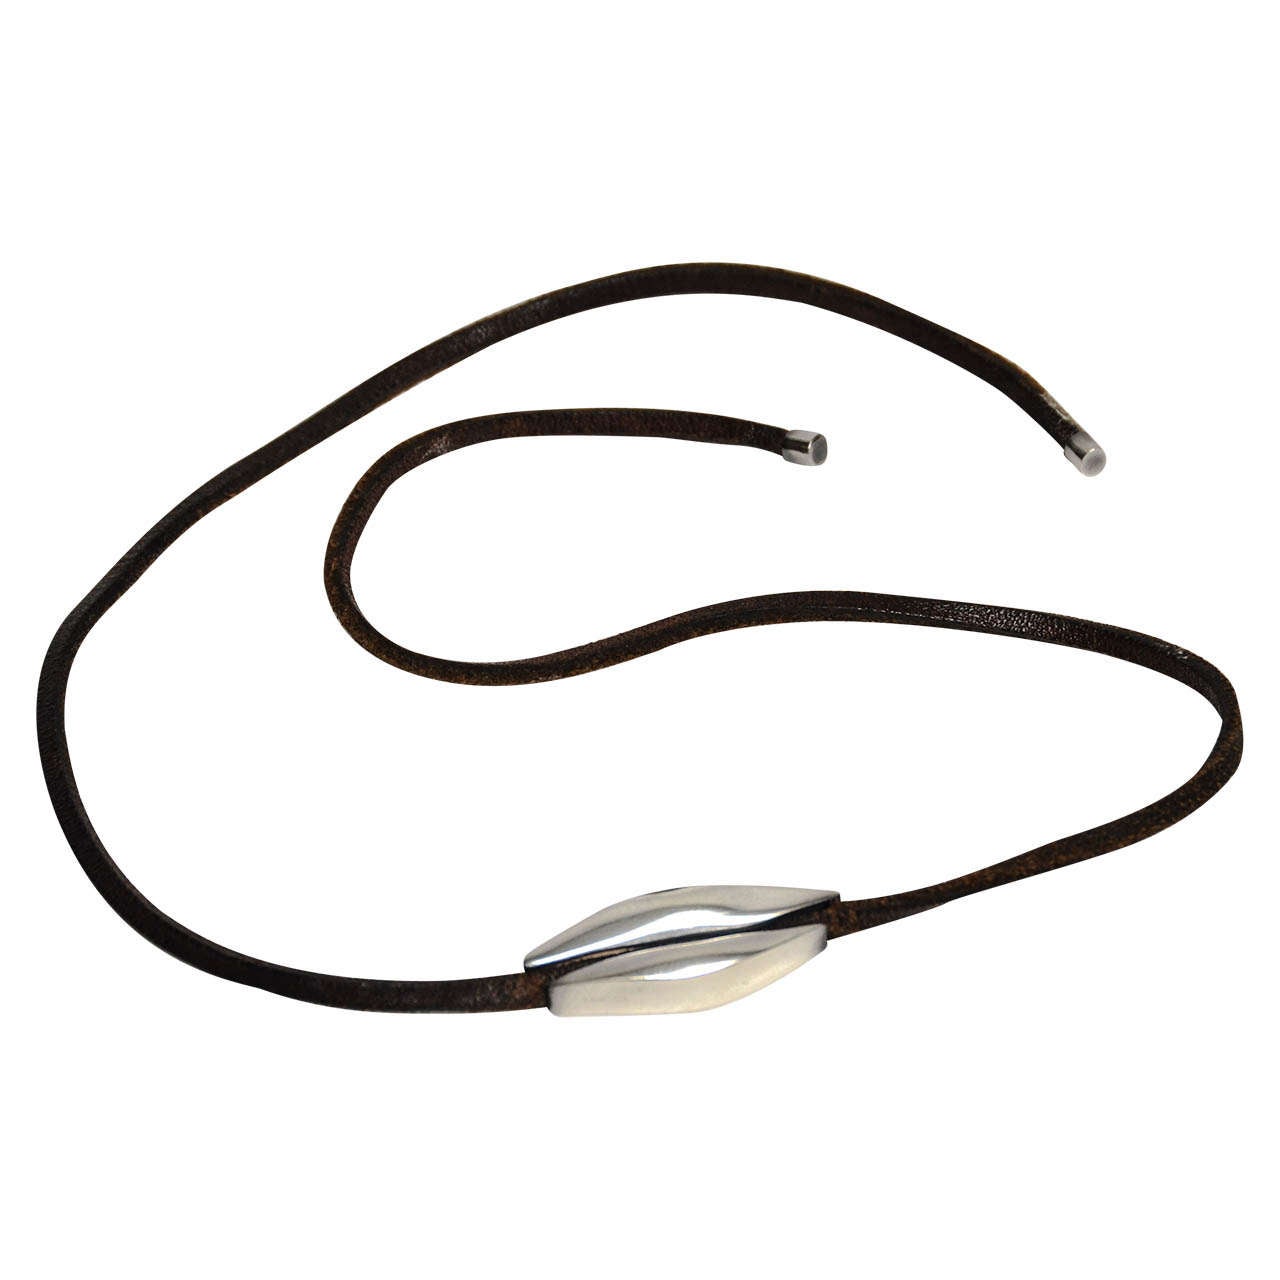 Georg Jensen Silver and Leather Necklace by A. Kraen, circa 1960 For Sale